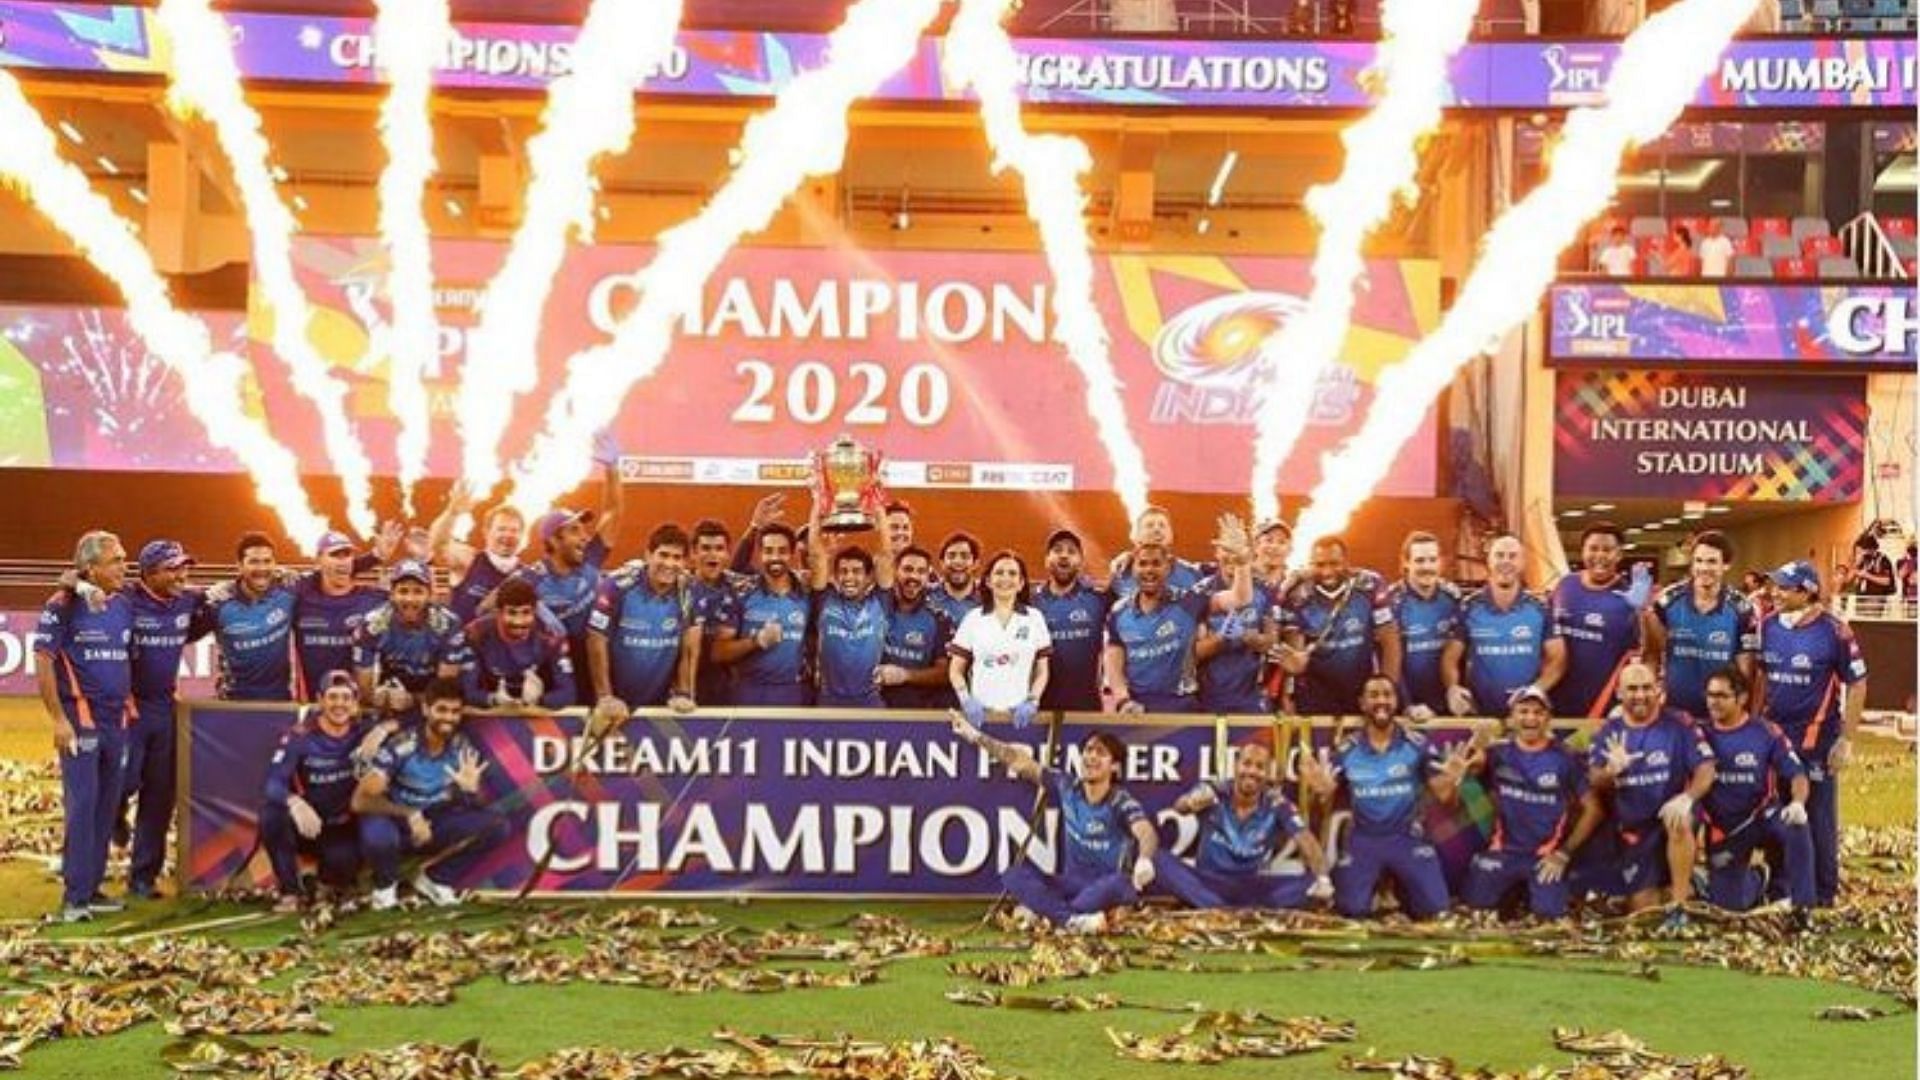 MI are the most successful IPL franchise having won five titles so far.